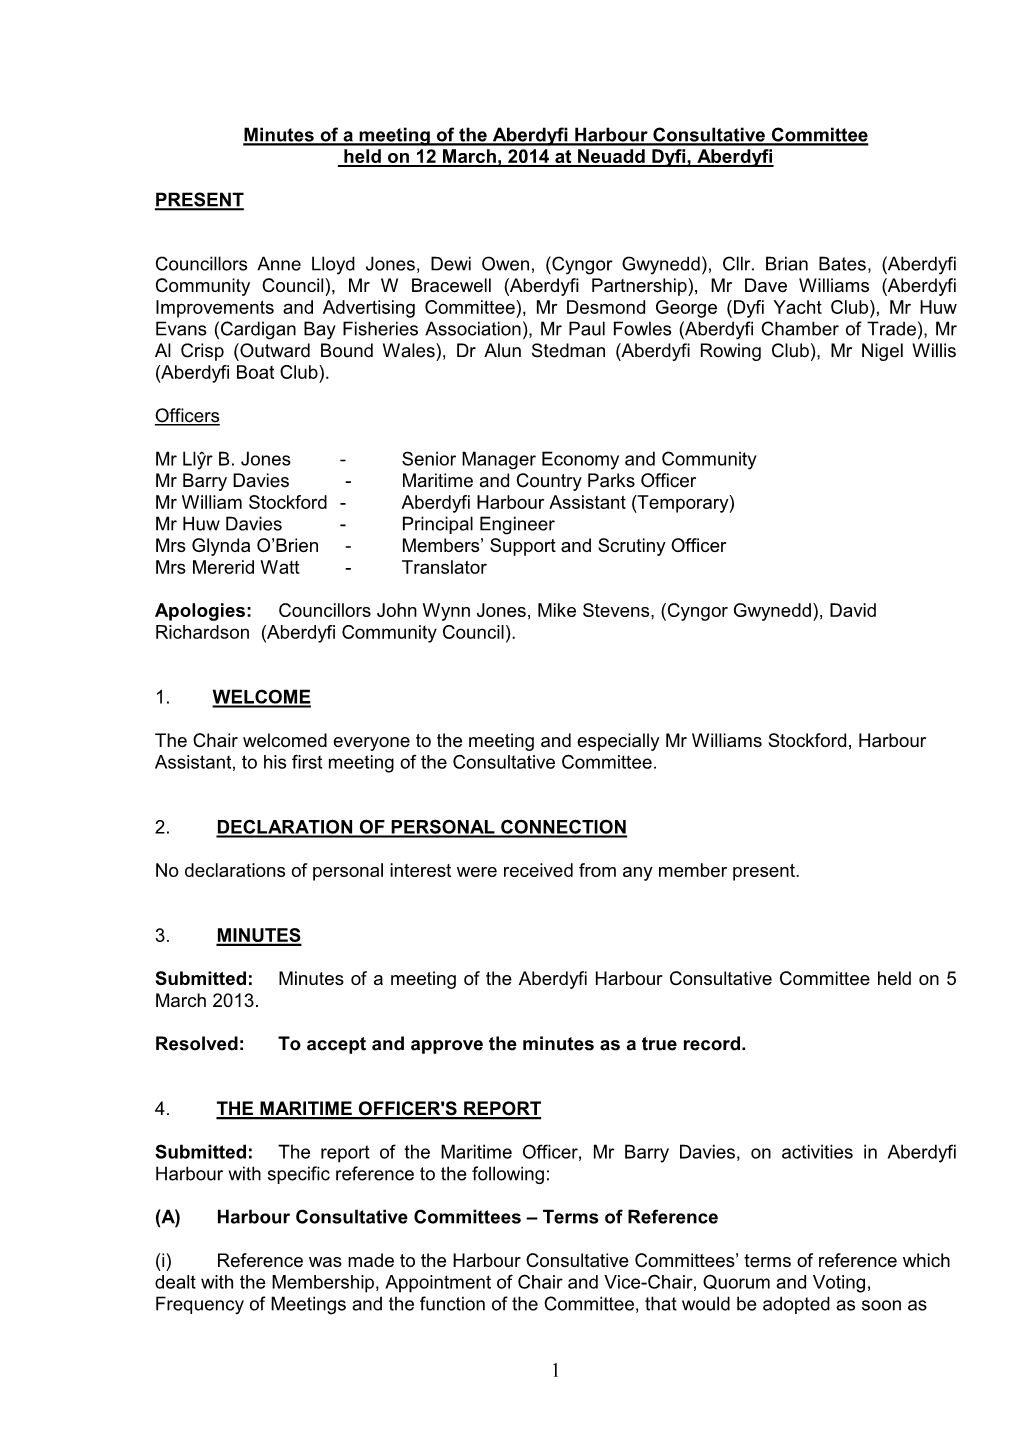 Minutes of a Meeting of the Aberdyfi Harbour Consultative Committee Held on 12 March, 2014 at Neuadd Dyfi, Aberdyfi